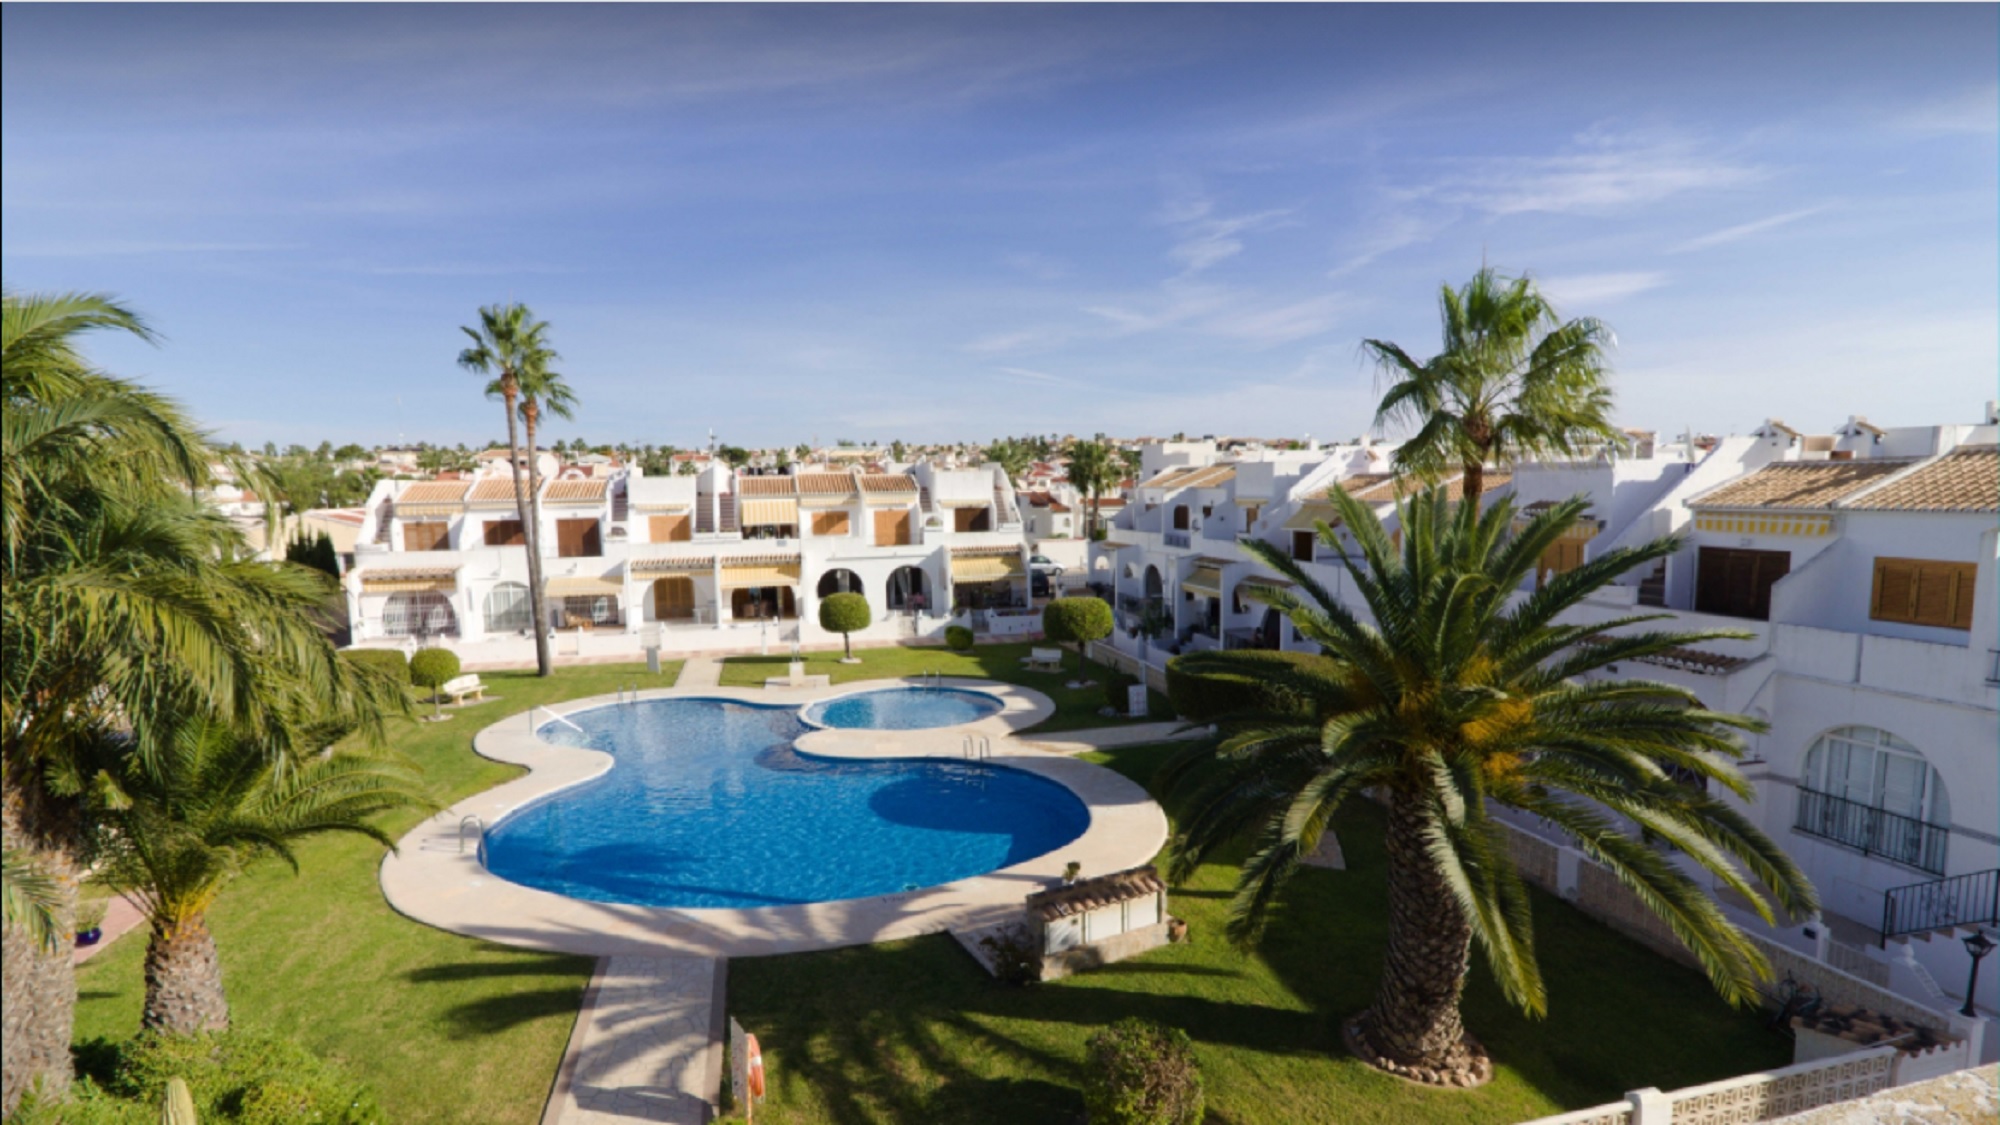 11 Things You Should Know When Buying a Golf Home in La Marquesa, Spain